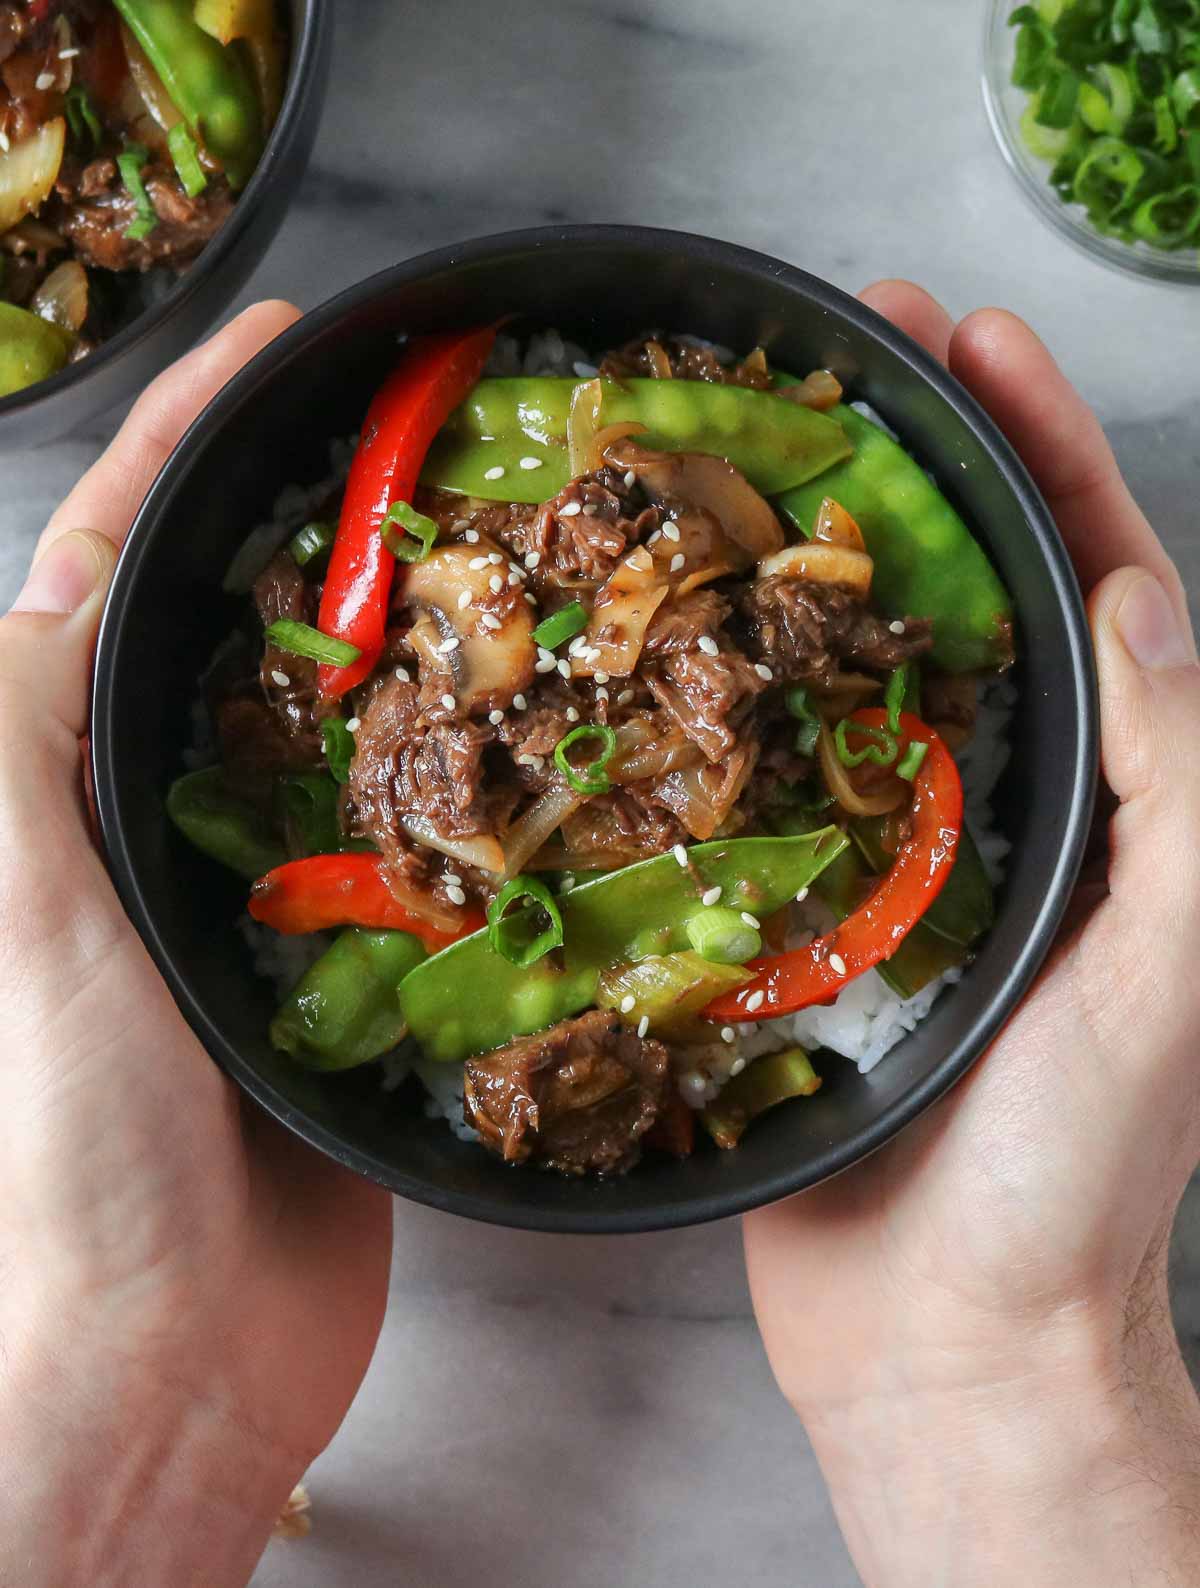 Two hands holding a bowl of moose stir-fry over rice.